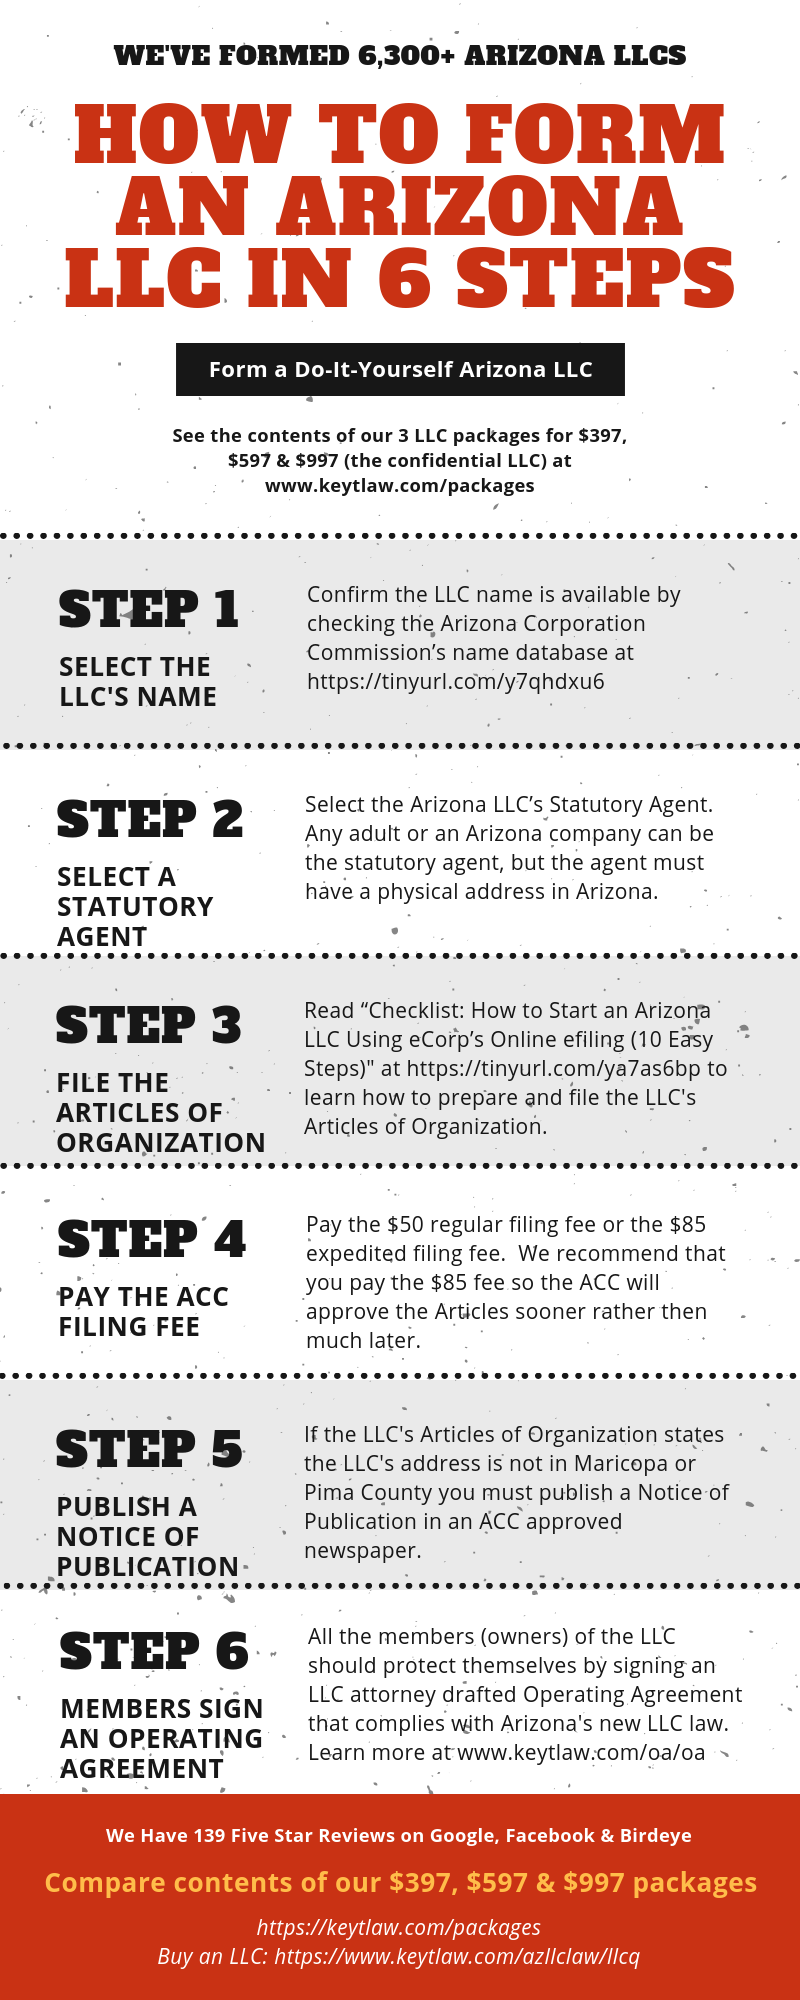 How To Set Up An Llc In California - The Facts